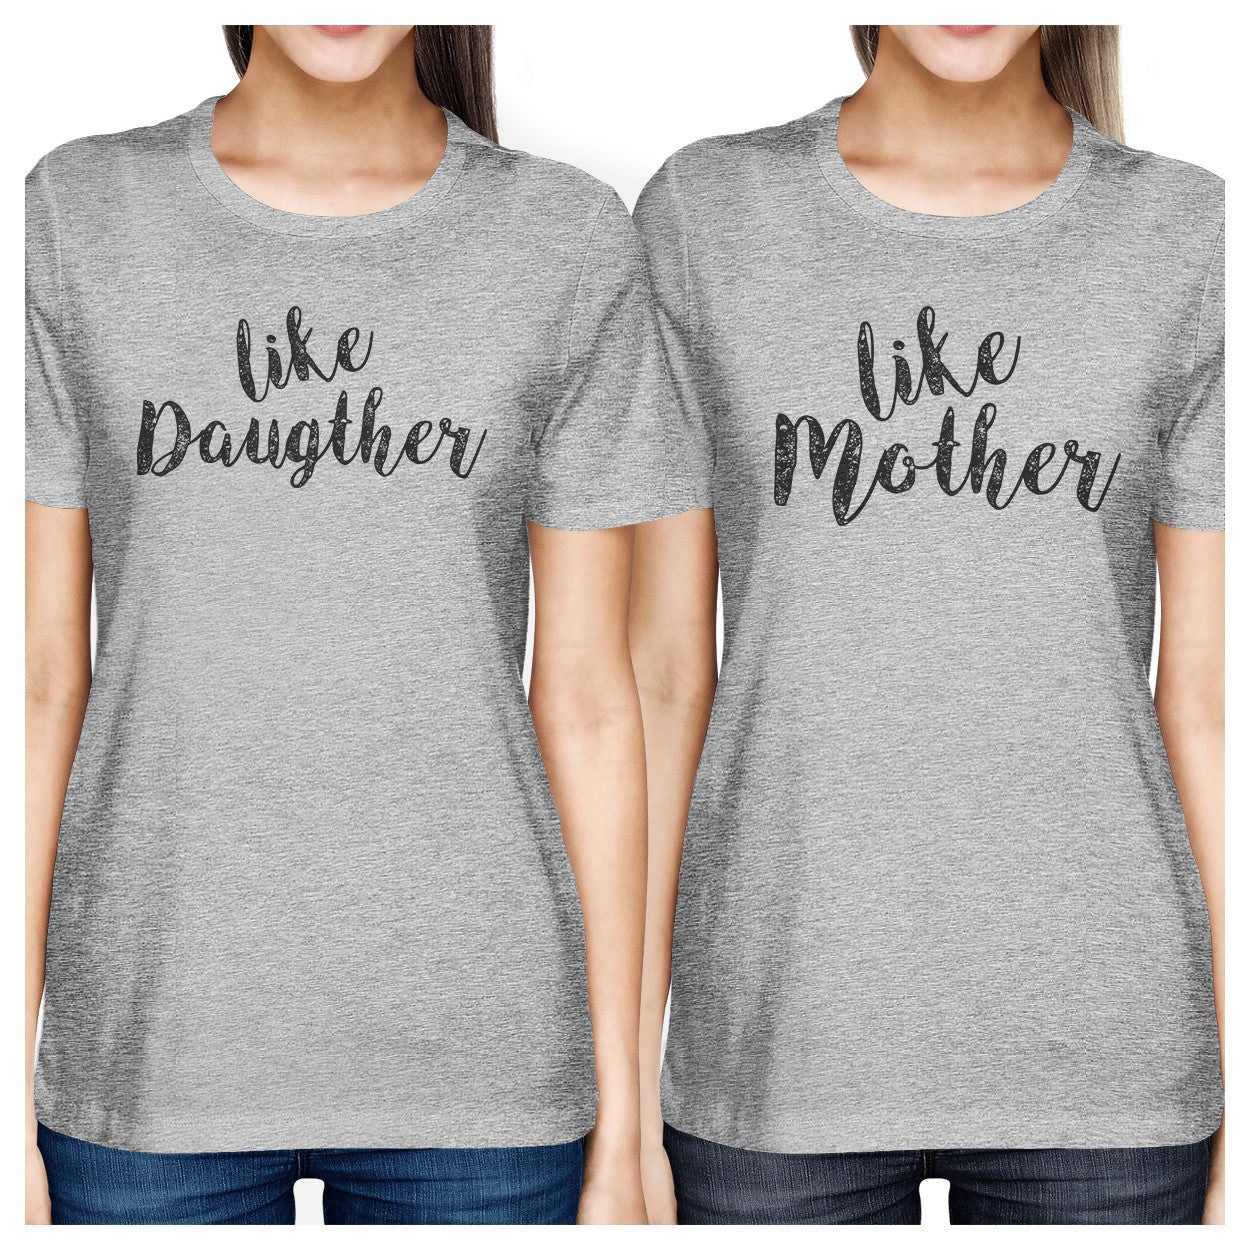 Like Daughter Like Mother Gray Matching Shirts For Mom And Daughter - 365 In Love